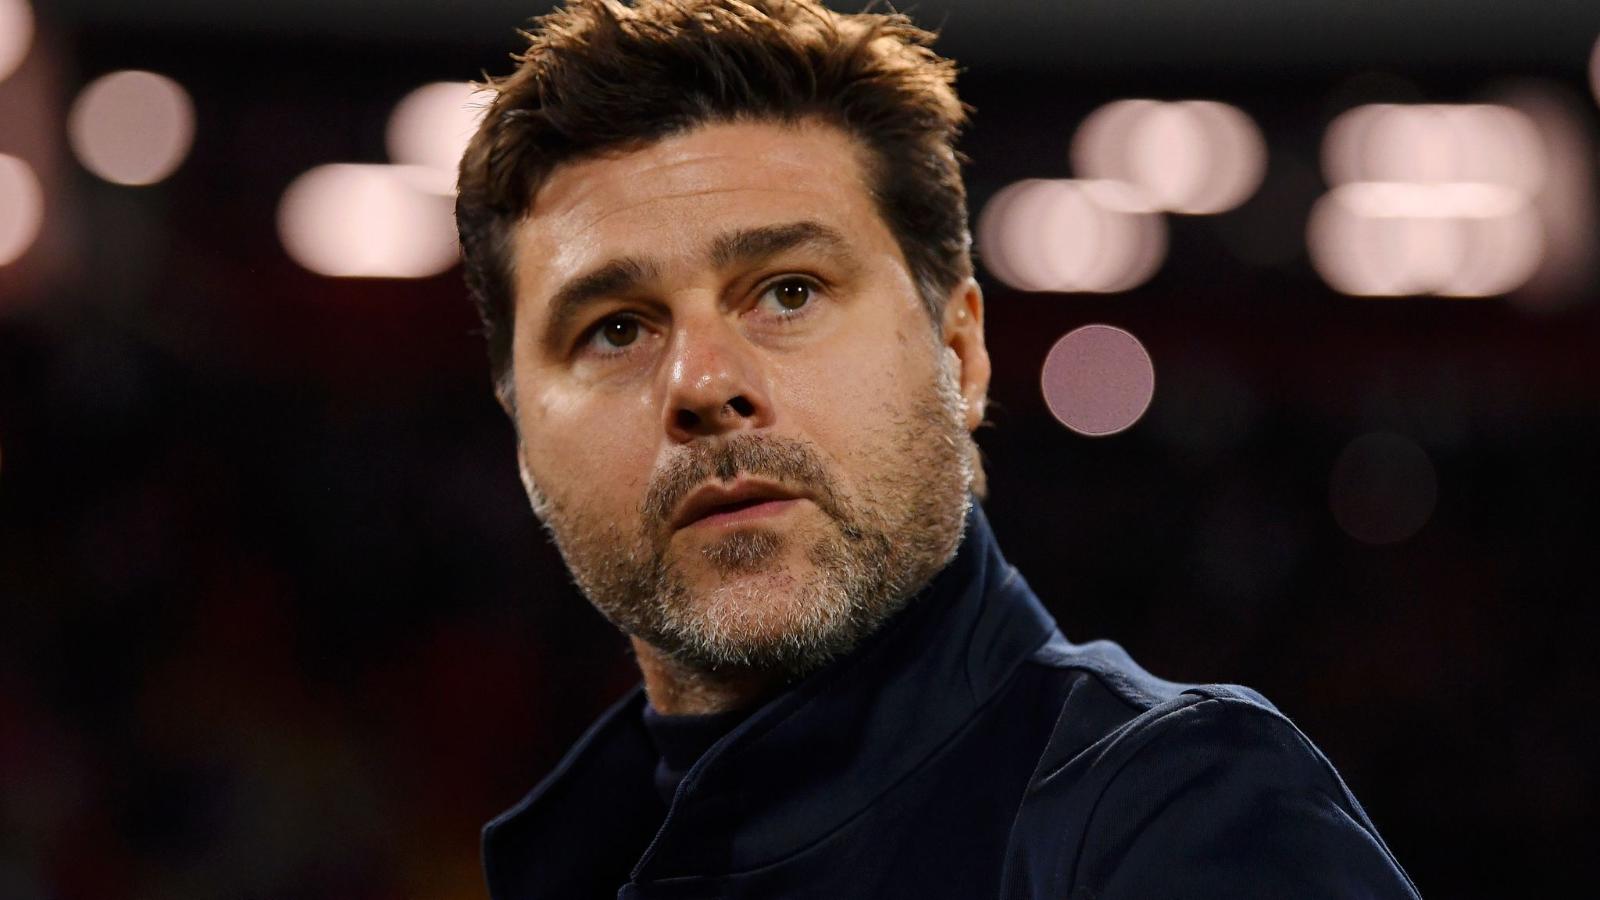 EPL: He was amazing – Pochettino singles out Chelsea star after latest victory